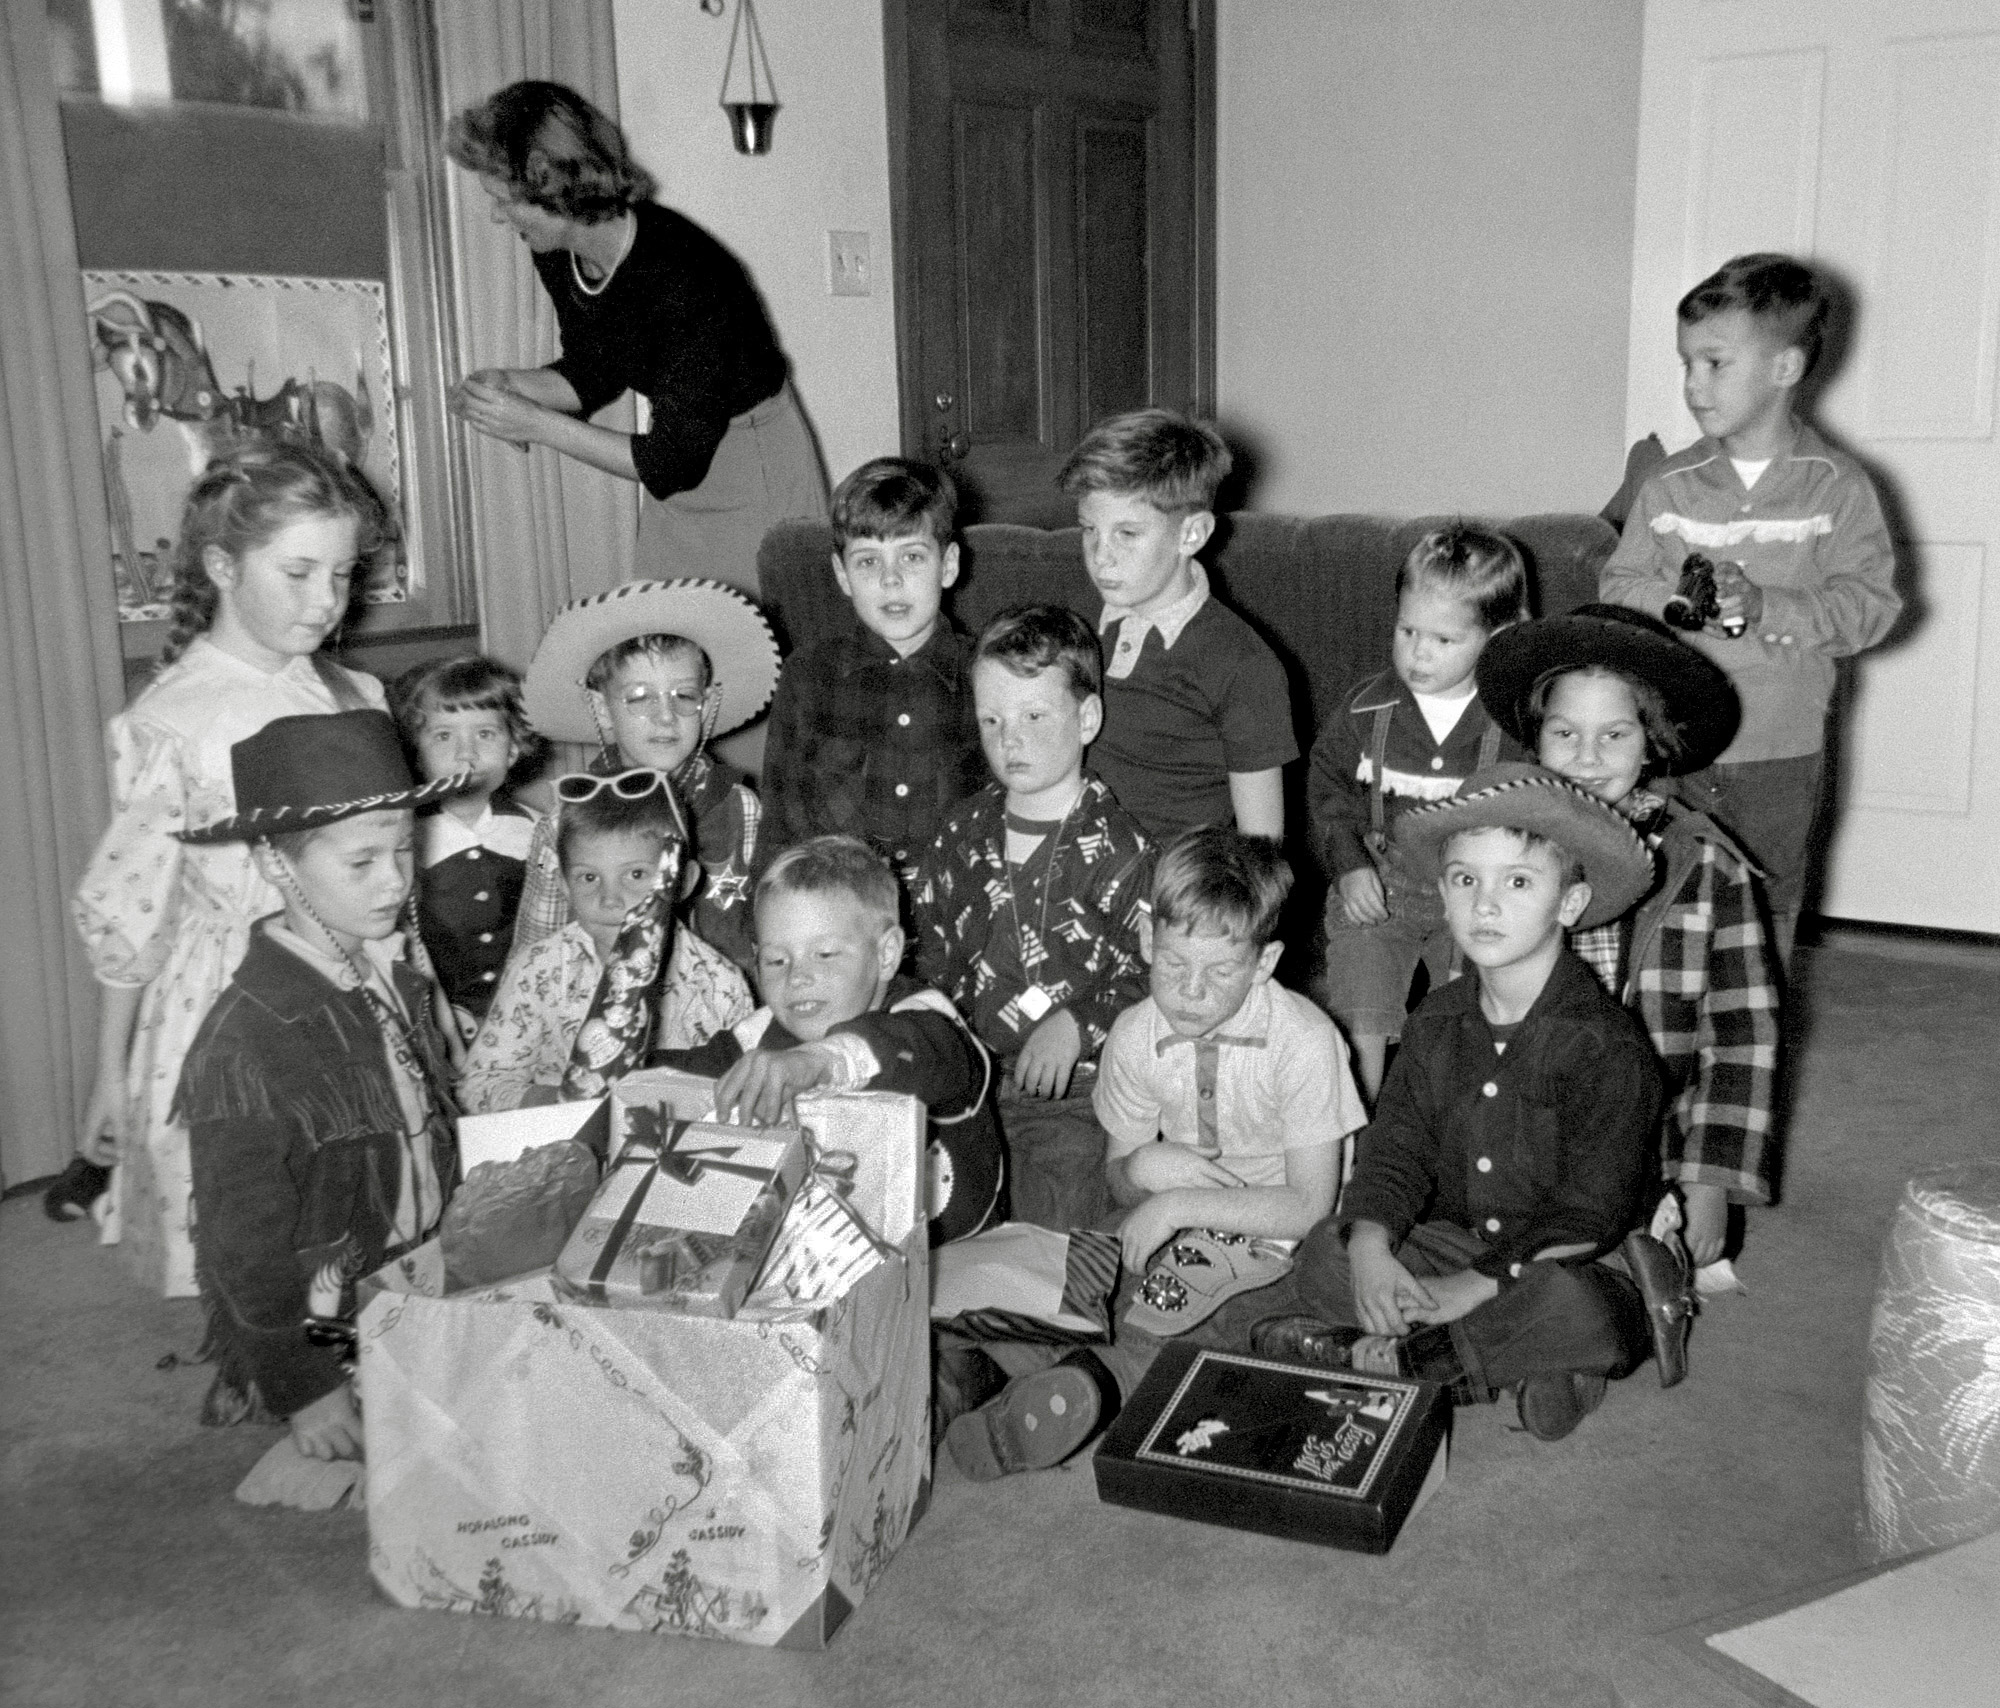 Larkspur, California, January 7, 1953. A photo of me I didn't know existed until a few days ago. I'm the second cowboy hat from the left at my best friend's 6th birthday party; I'd turned 6 the previous August. It's one of the rare childhood events that I've always carried a memory of; specifically: I insisted on leaving the party early so I could get home in time to watch "Time for Beany" on TV. My brother - whose hat that had been - came over and walked me home. My other classmates are the kid with the giant glasses on his head and the cowgirl behind the wide-eyed boy at right; I met up with her at our high school Class of '64 50th reunion last September. Others are mostly relatives, including June Cleaver his aunt setting up pin-the-tail-on-the-donkey. I gotta say, for a kid with a birthday so close to Christmas, it looks like my friend made out like a bandit.

Many thanks to his sister, the little girl at my side, for getting this negative to me to scan. View full size.